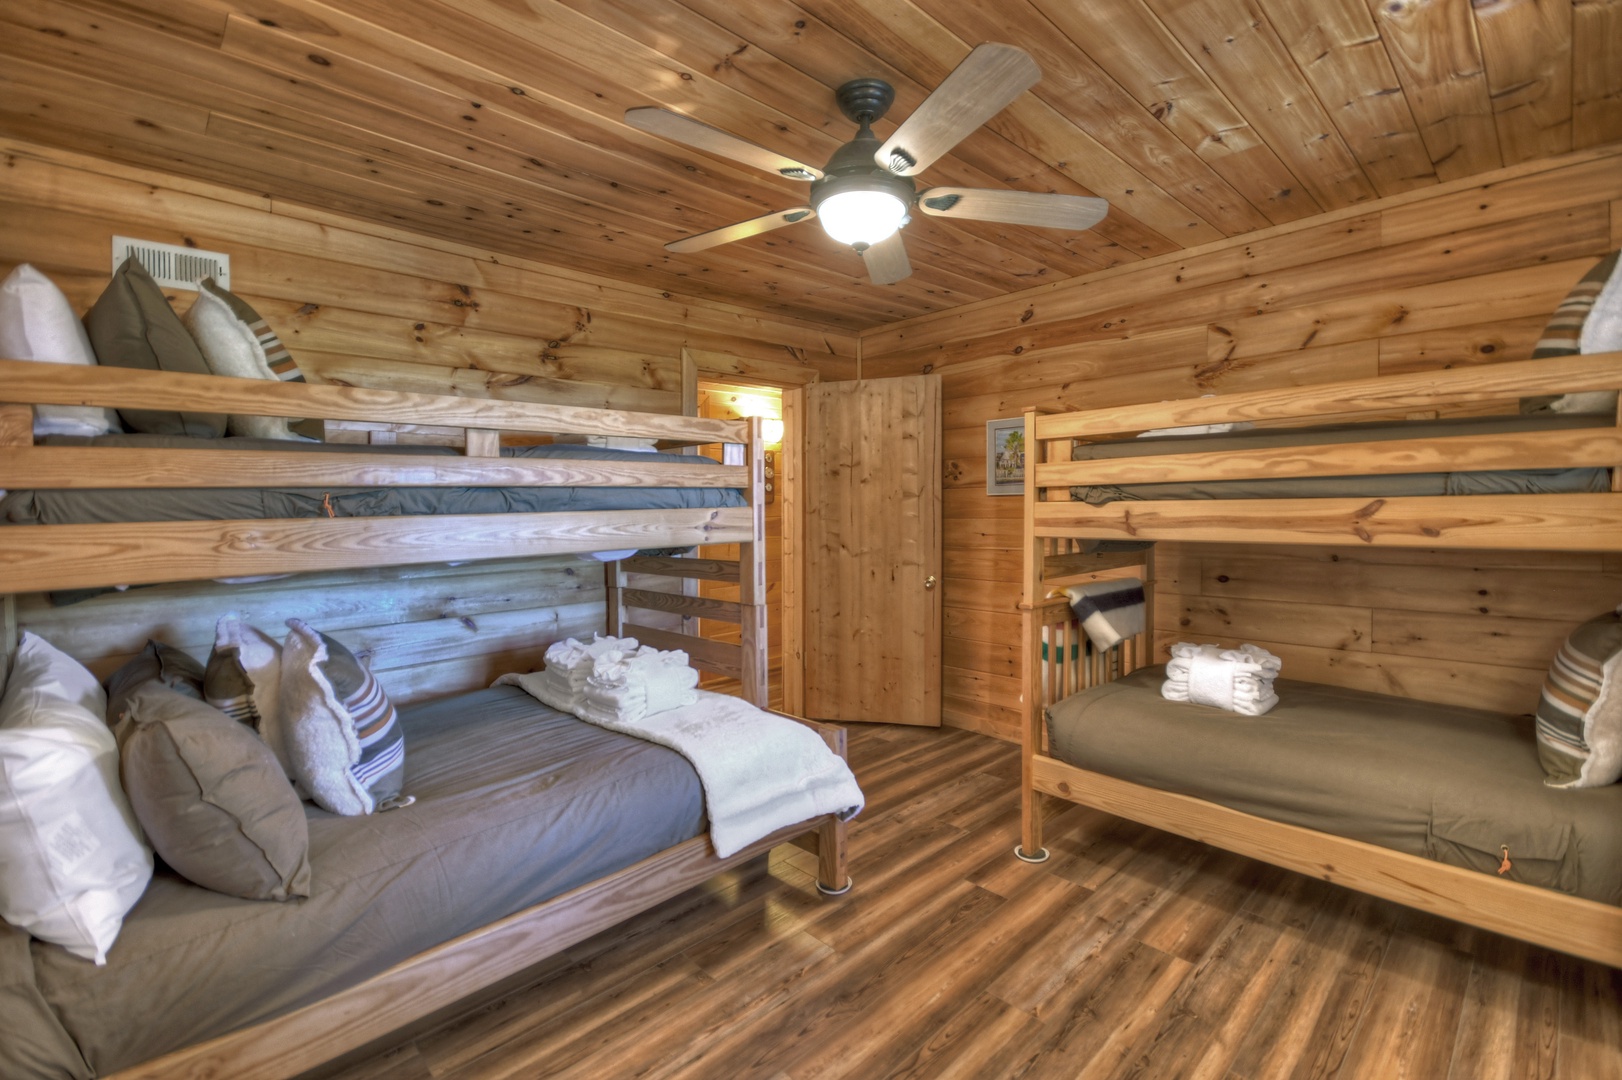 Ridgetop Pointaview- Lower level bunk room with 4 beds